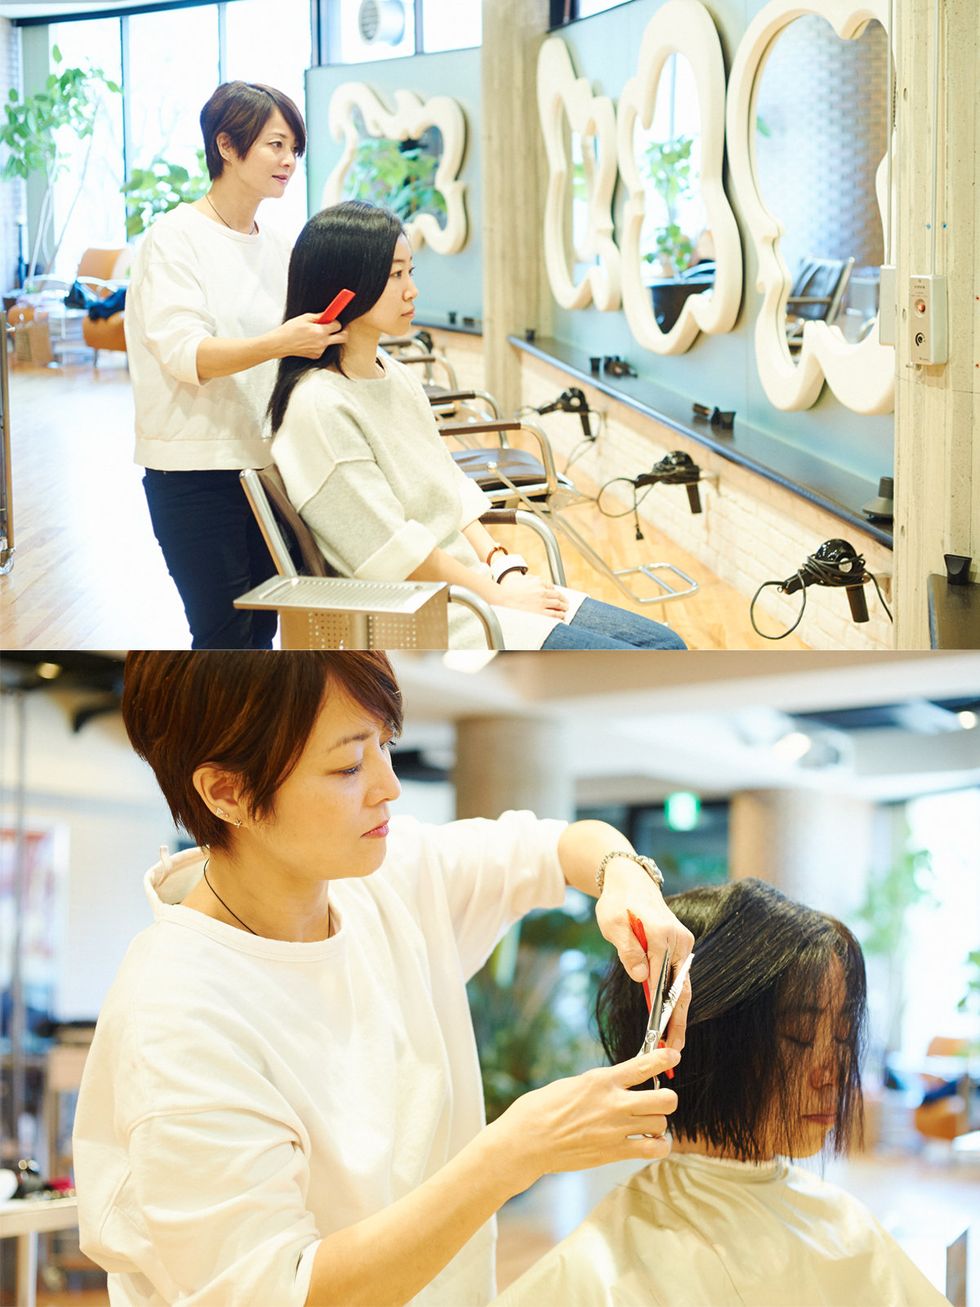 Head, Hairstyle, Beauty salon, Service, Hairdresser, Temple, Black hair, Houseplant, Personal grooming, Long hair, 